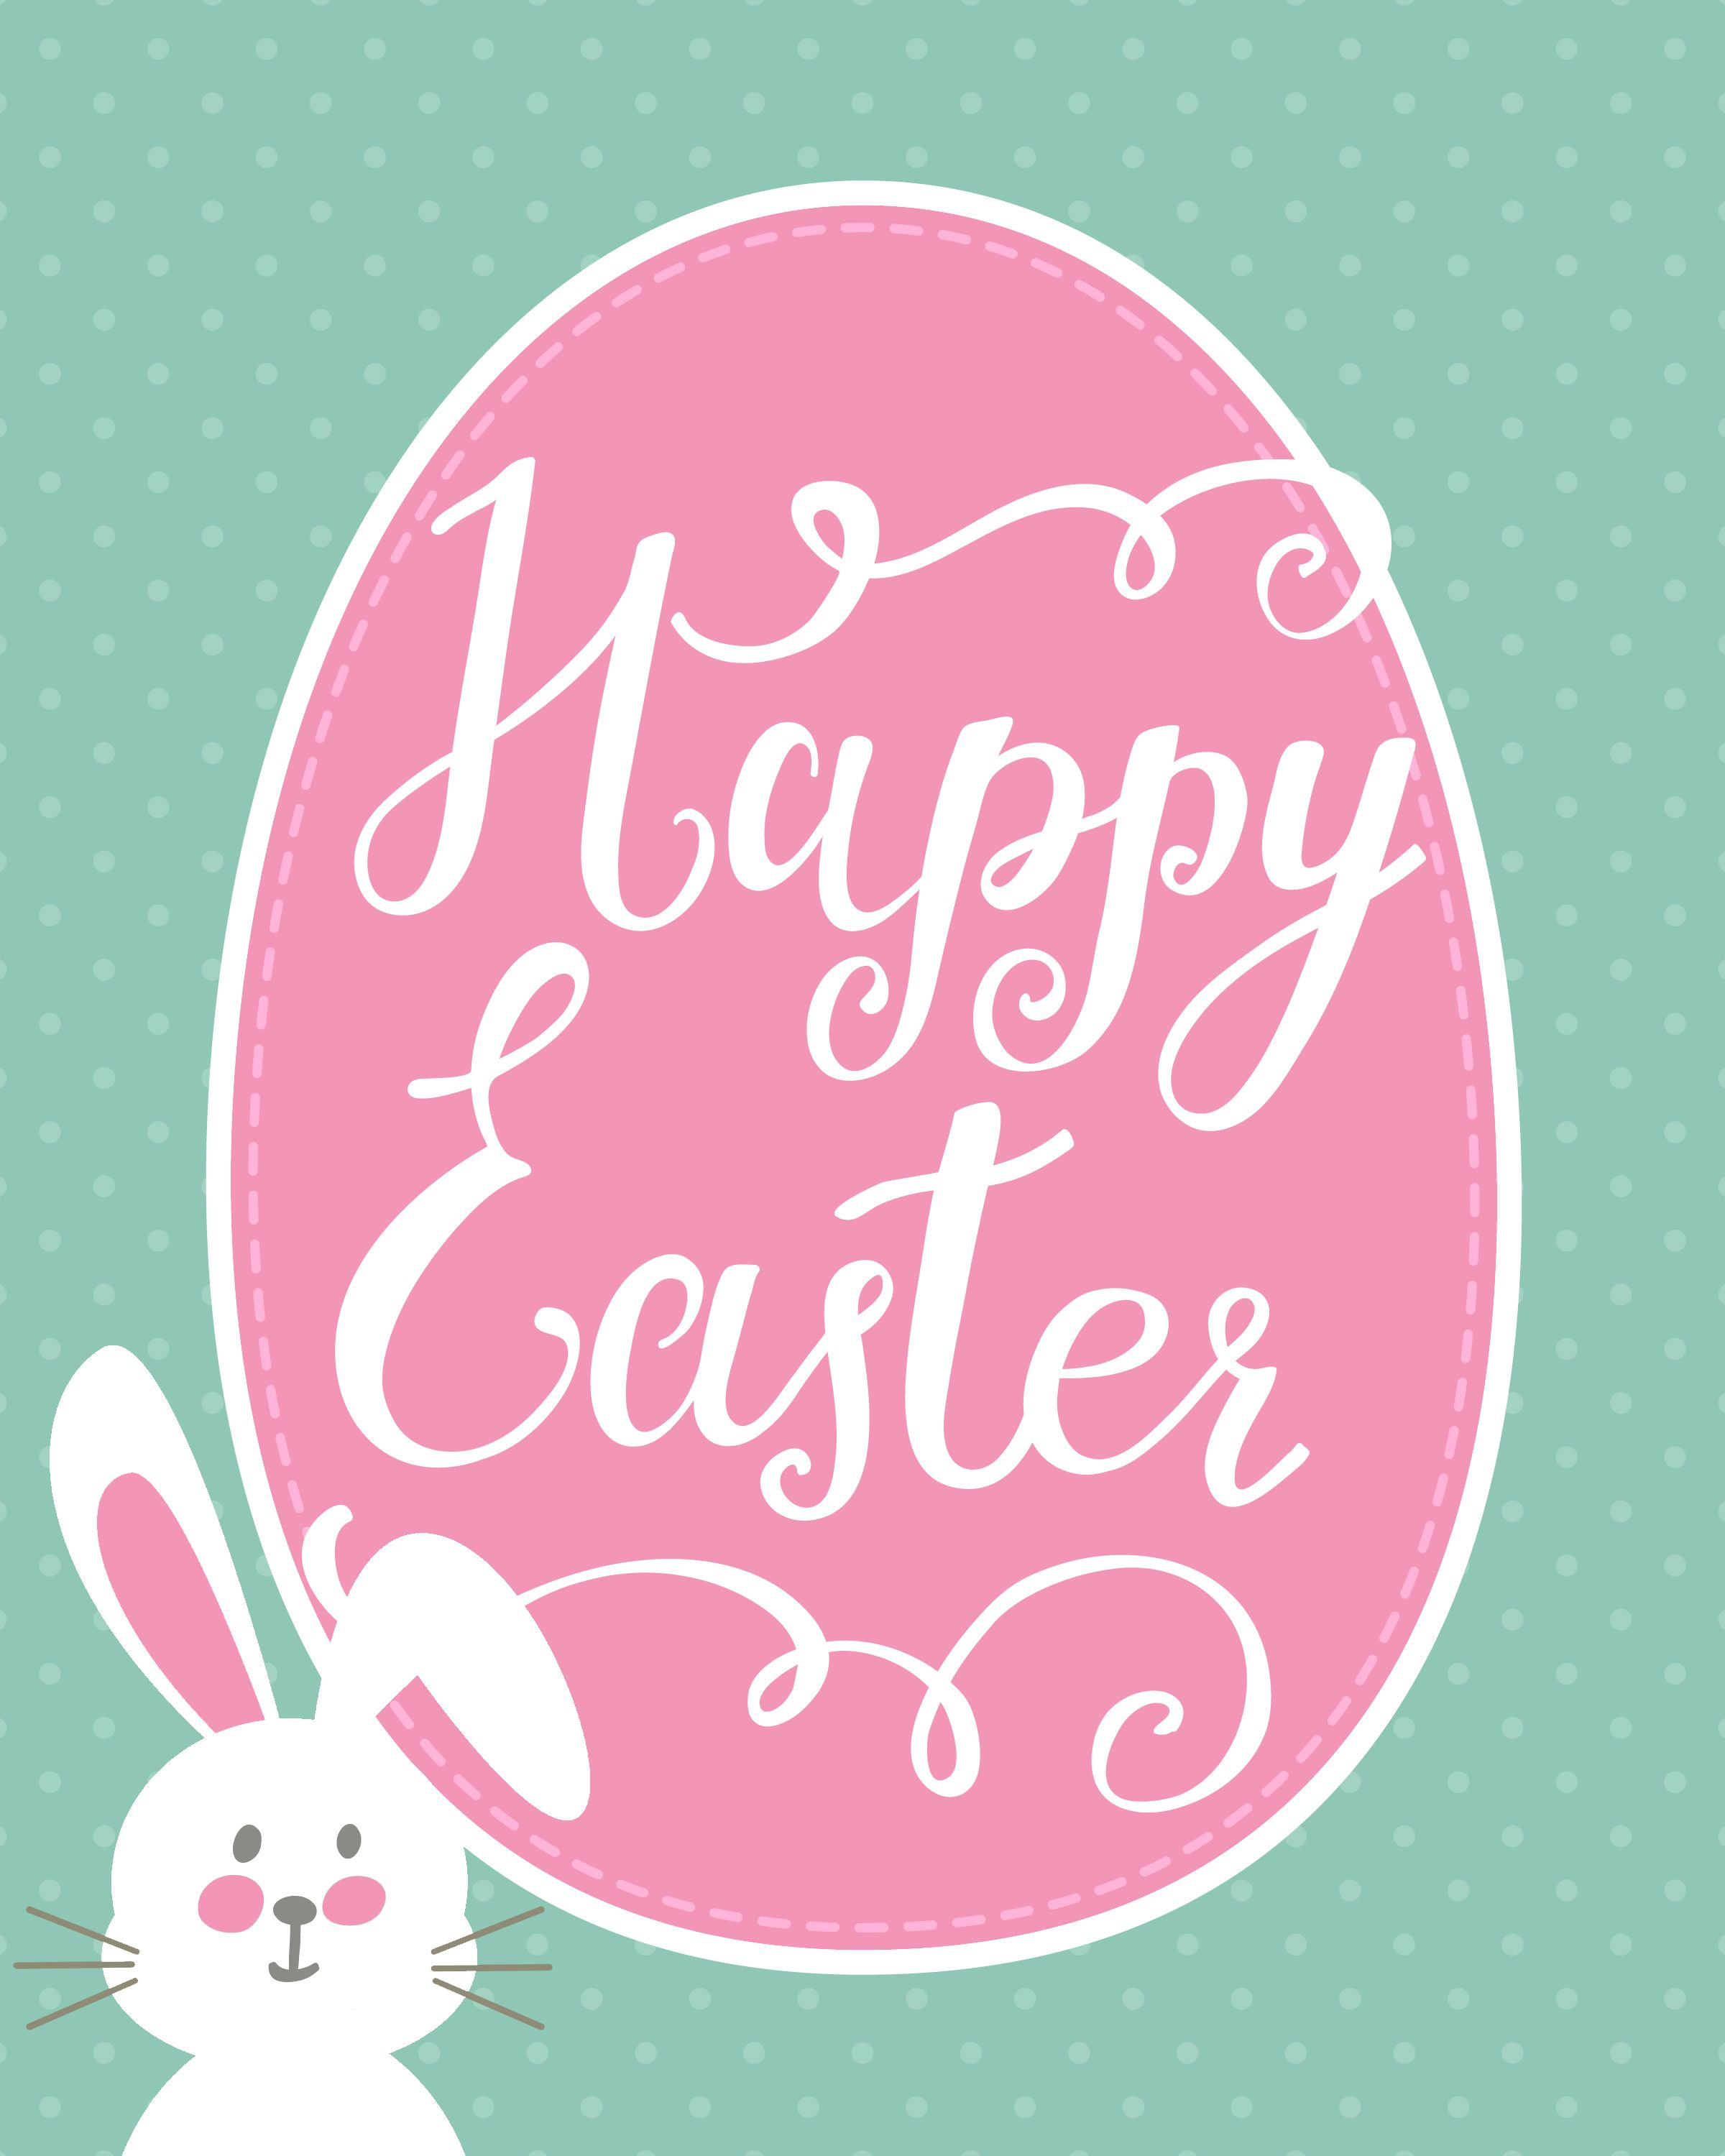 Happy Easter Bunny Printable | Holidays - Easter | Happy Easter - Free Printable Easter Images